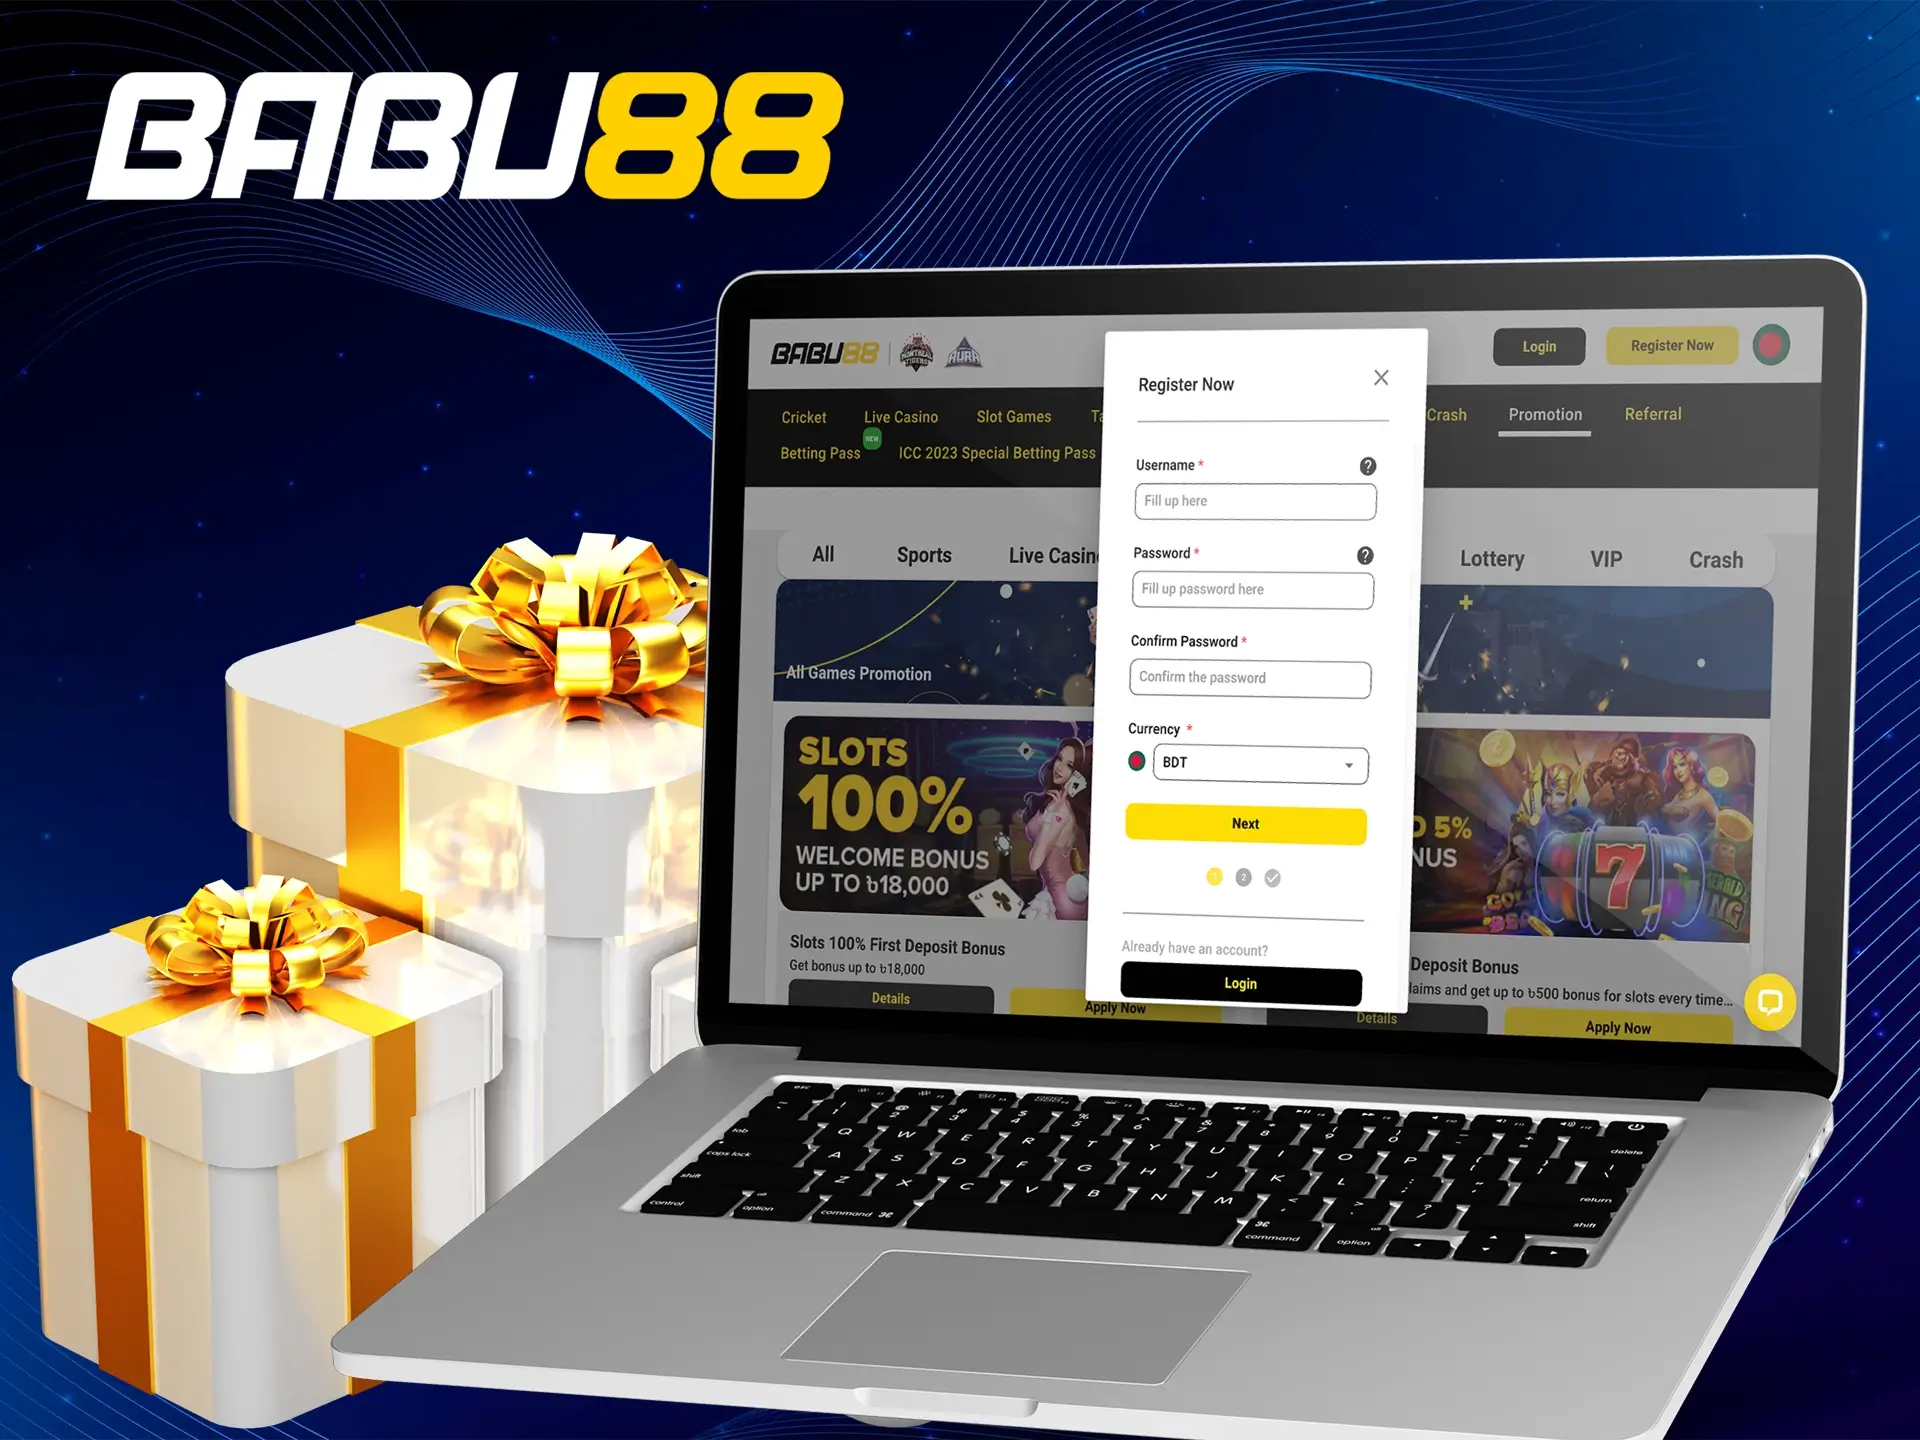 At Babu88, getting the bonus is a simple registration and first deposit.